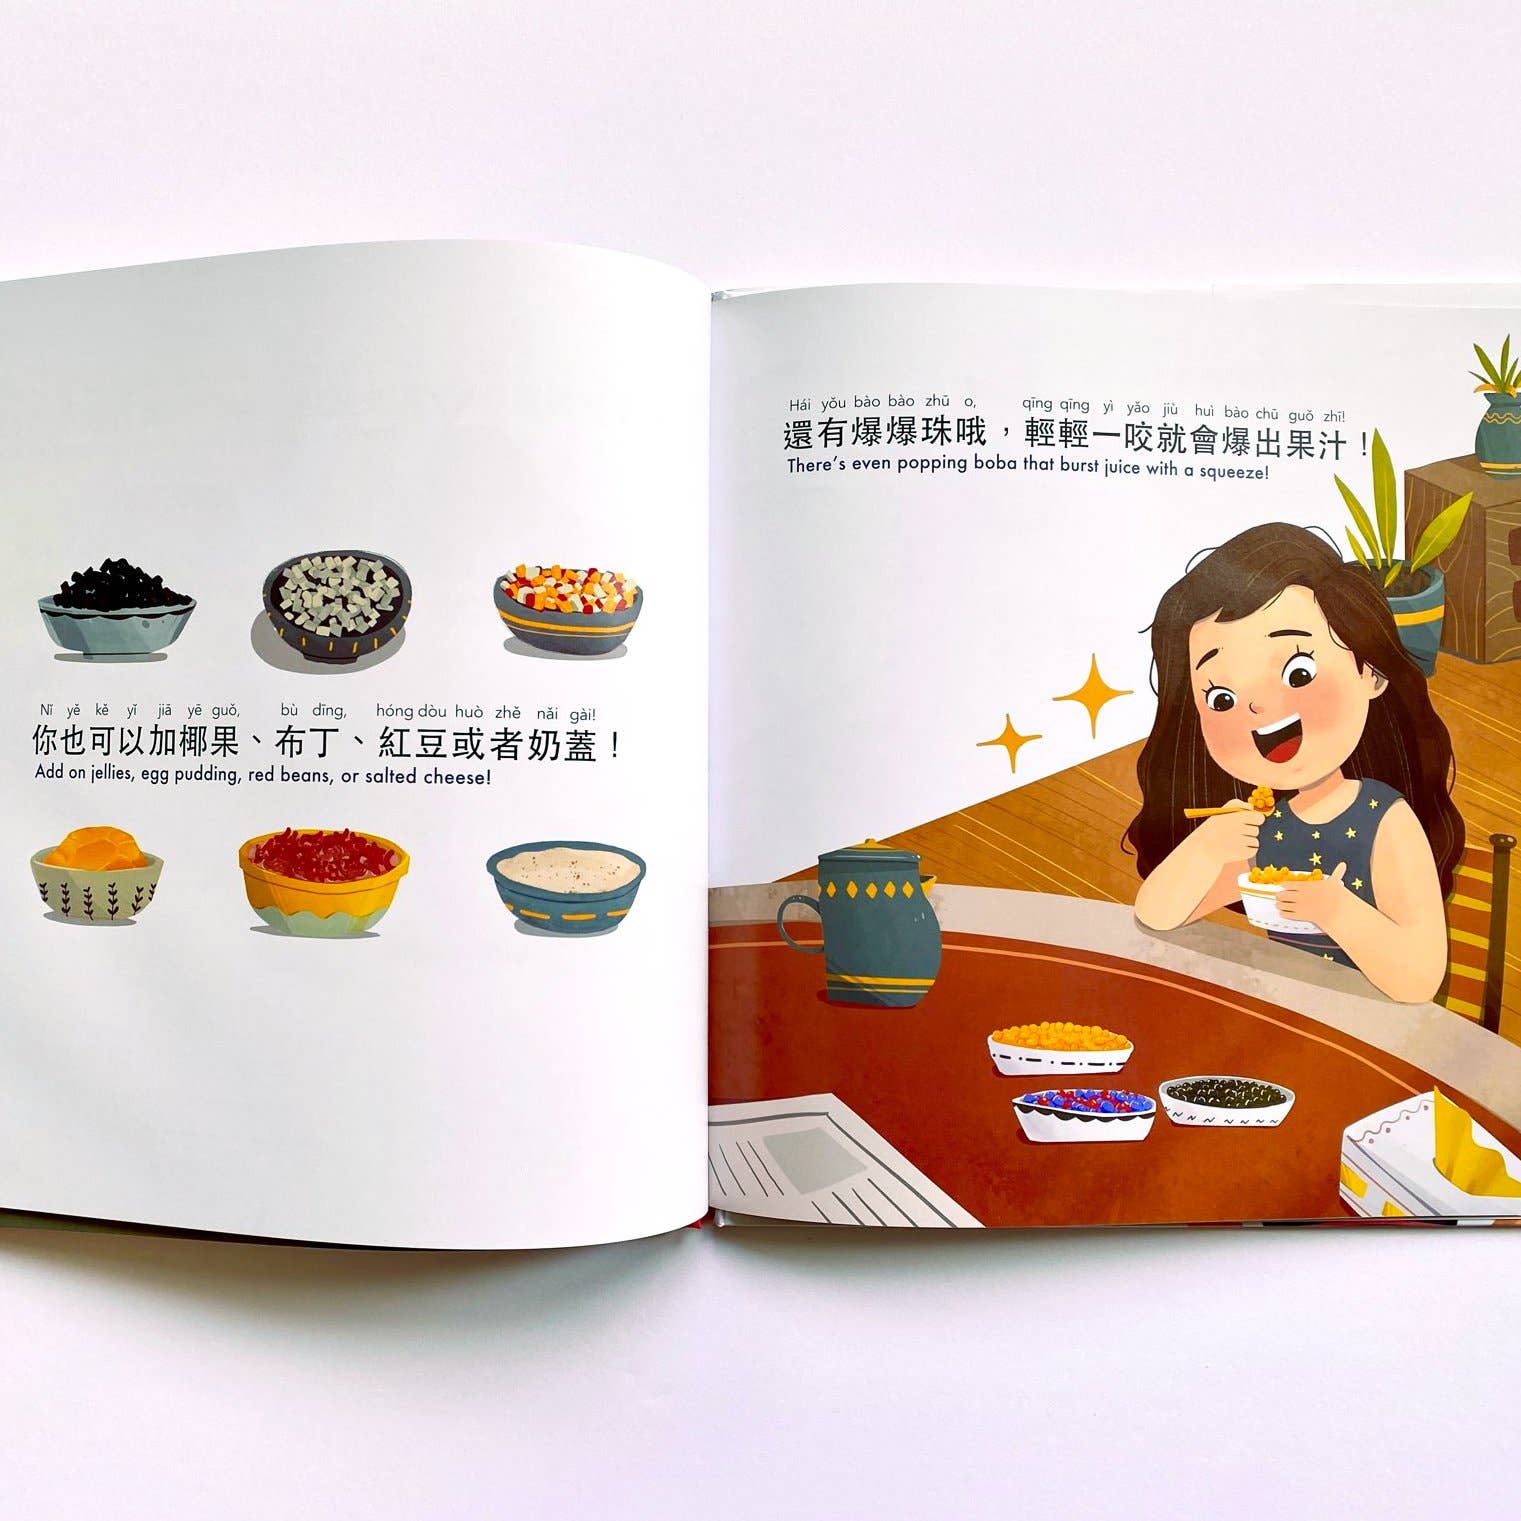 I love BOBA! - The First Children's Book about Bubble Tea